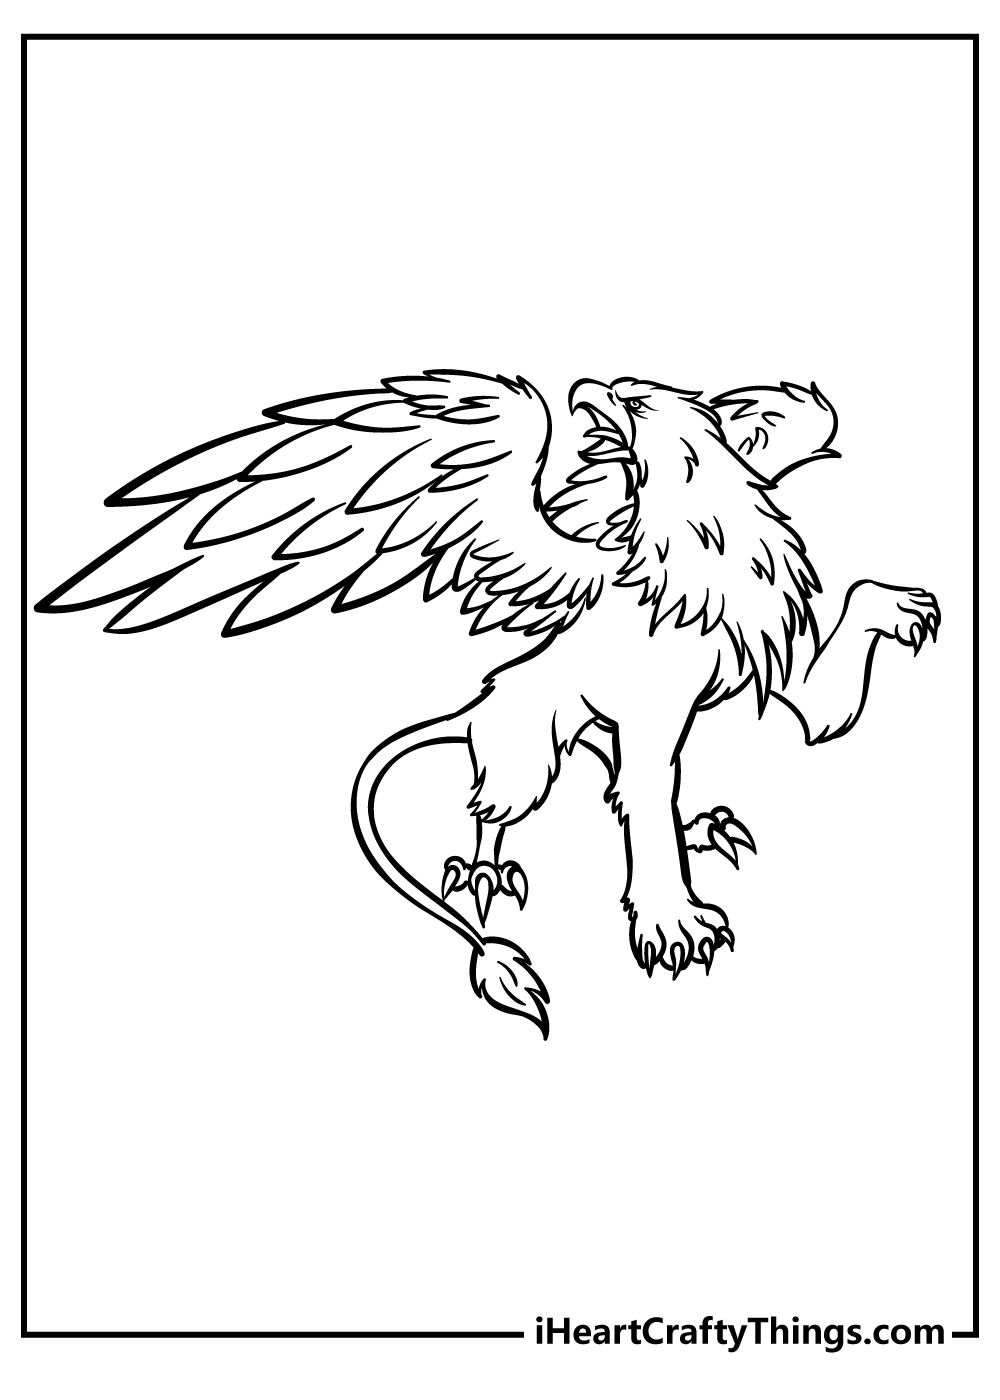 Griffin Coloring Pages free pdf download